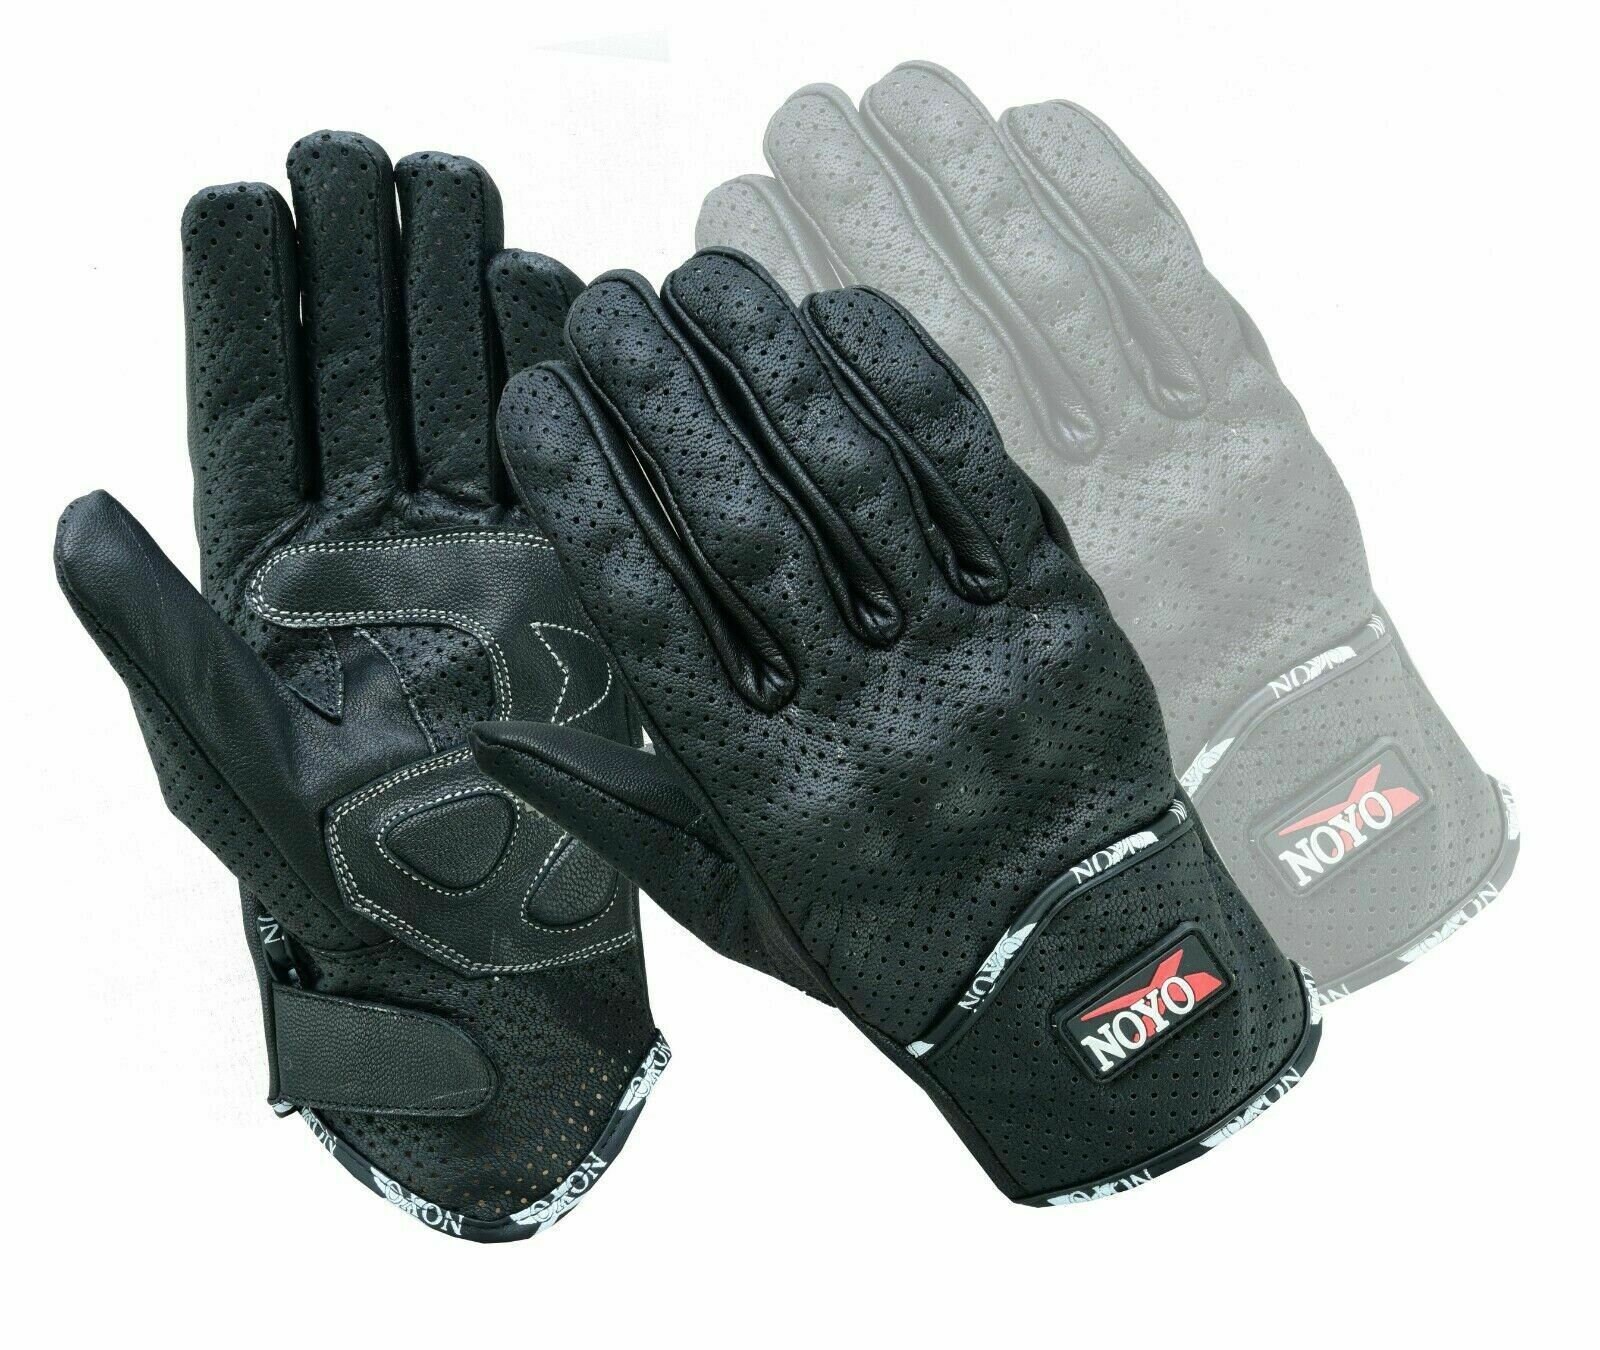 Protec anti slash fire resistant black leather and Kevlar gloves security SIA. 